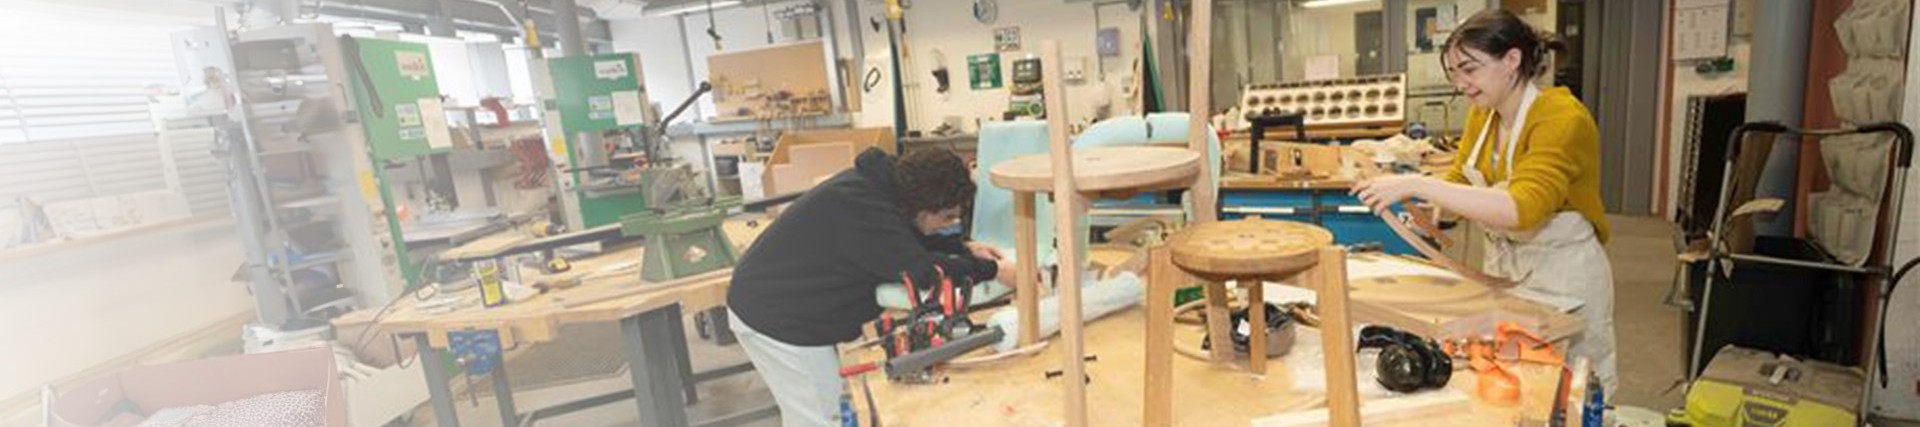 Students working in a furniture workshop